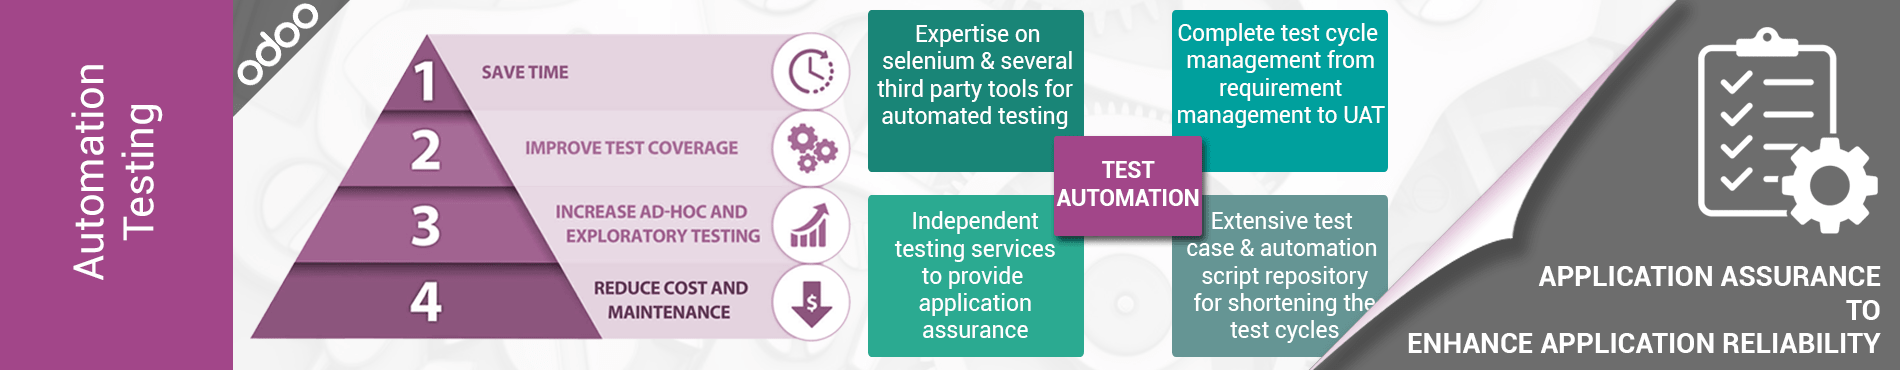 automation testing software